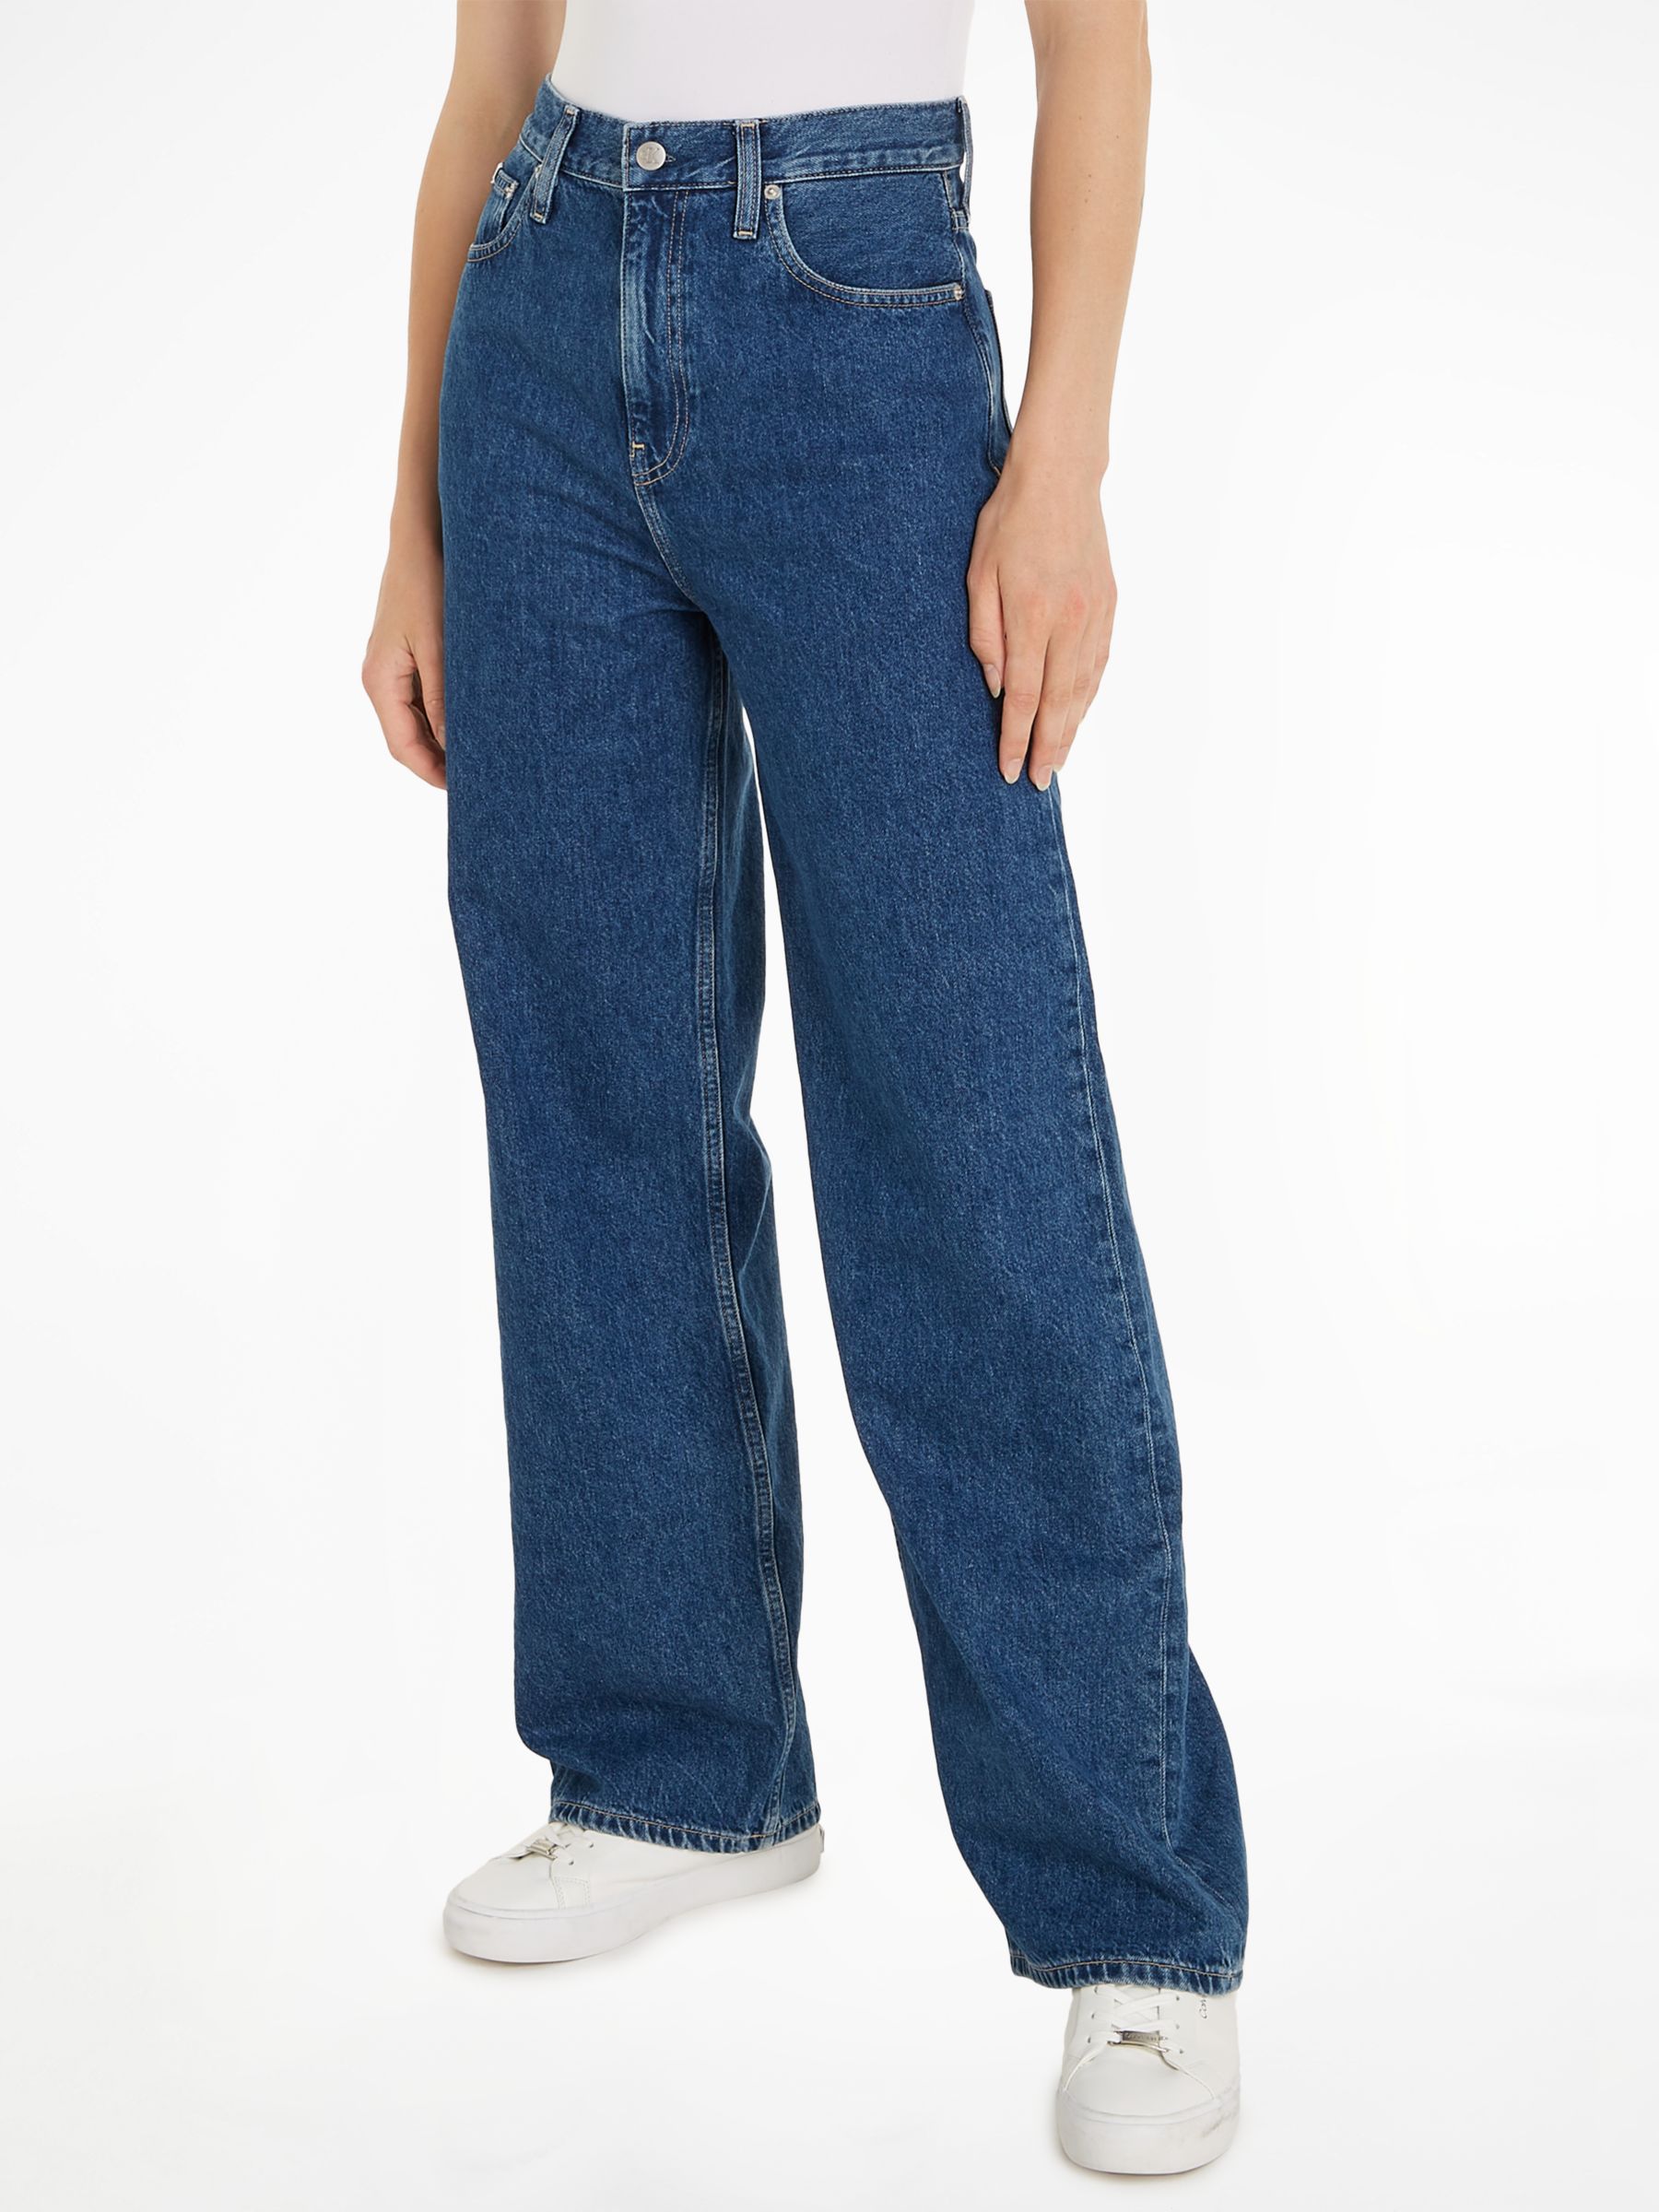 Calvin Klein High Rise Relaxed Fit Jeans, Mid Blue, W25/L32